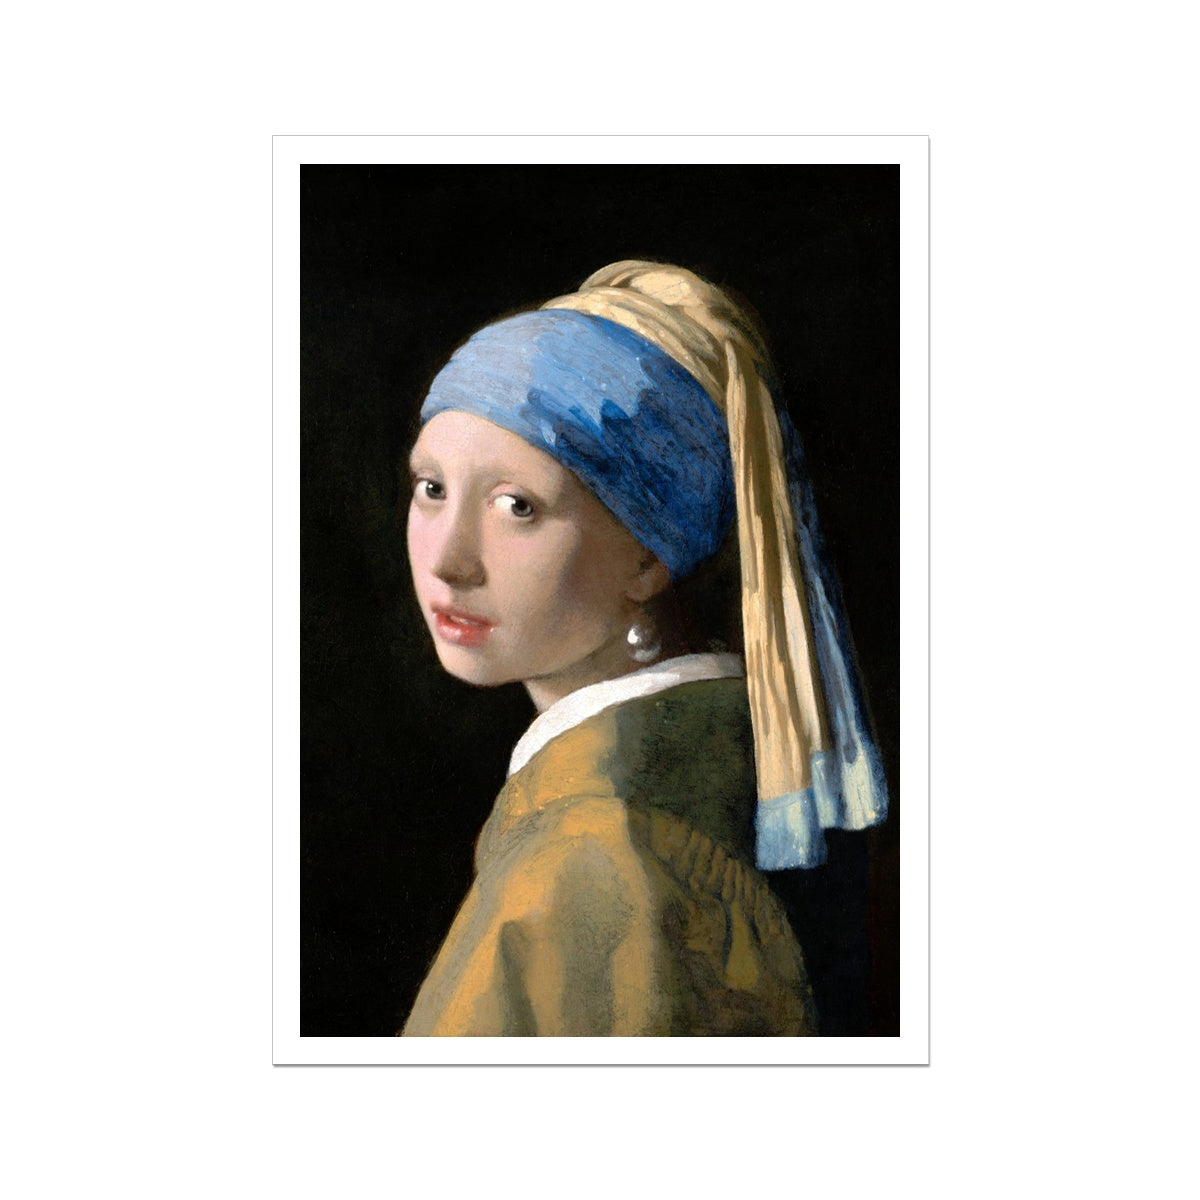 'Girl with a Pearl Earring', by Johannes Vermeer. Open Edition Fine Art Print. Art Gallery Historic Art